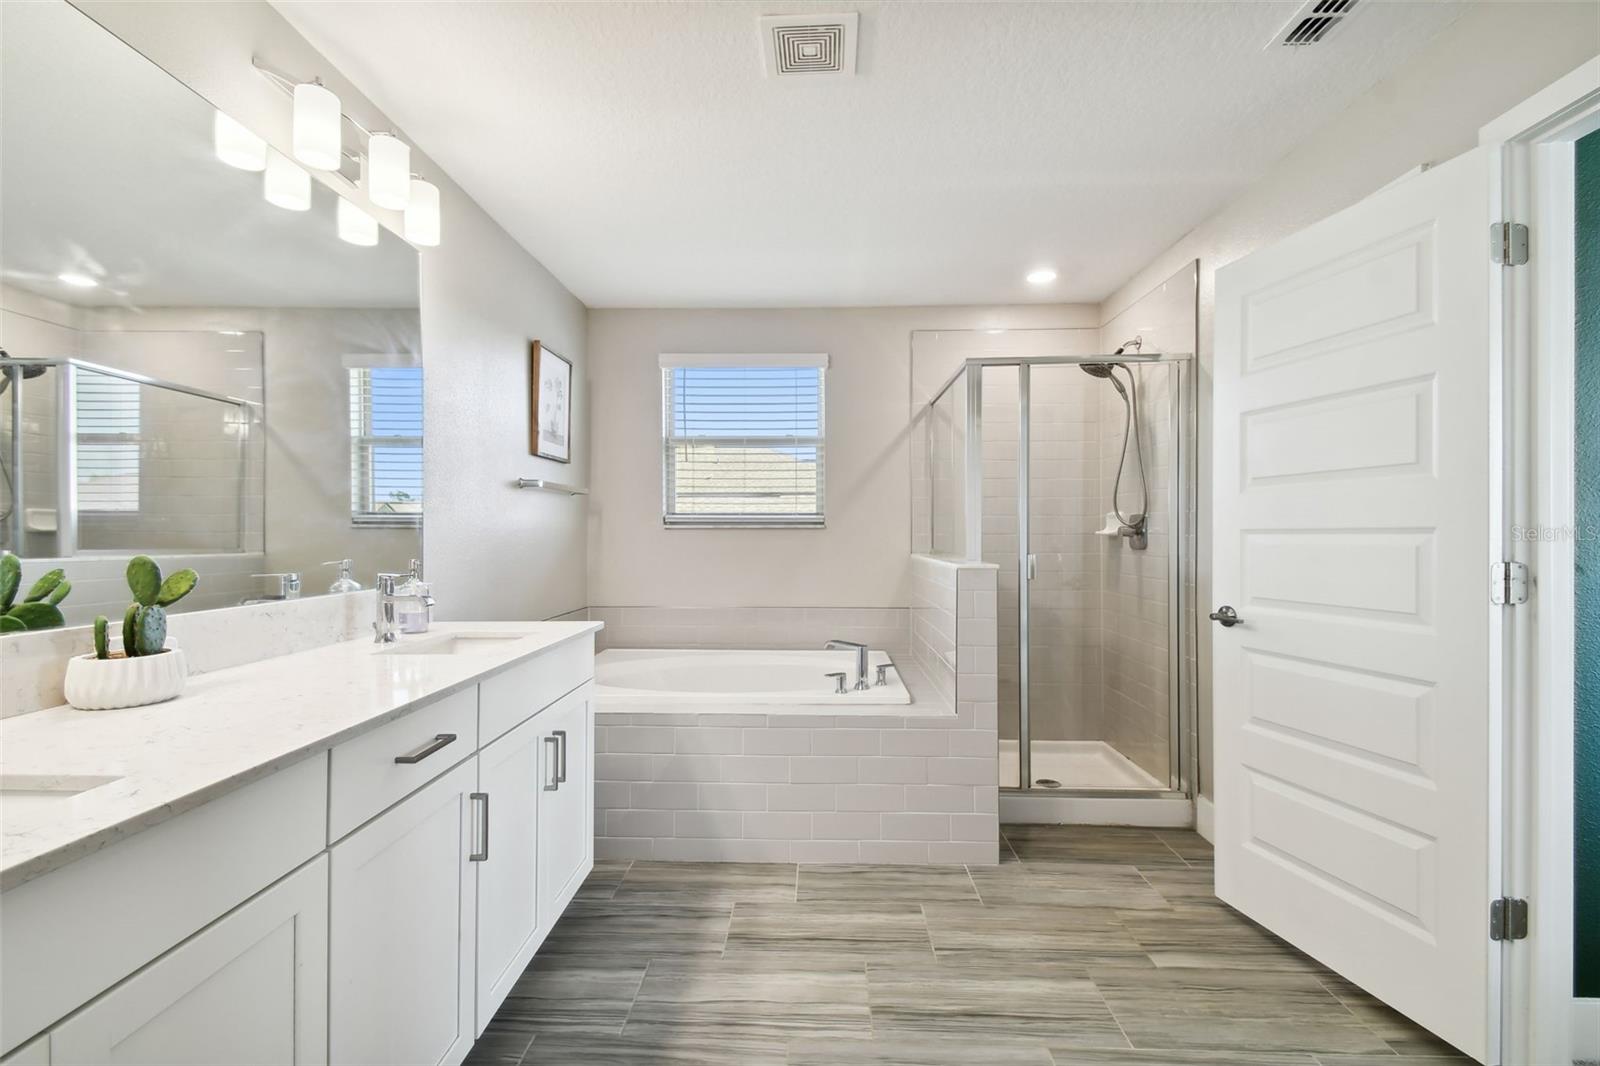 Master bathroom with double sinks, shower, and soaker tub